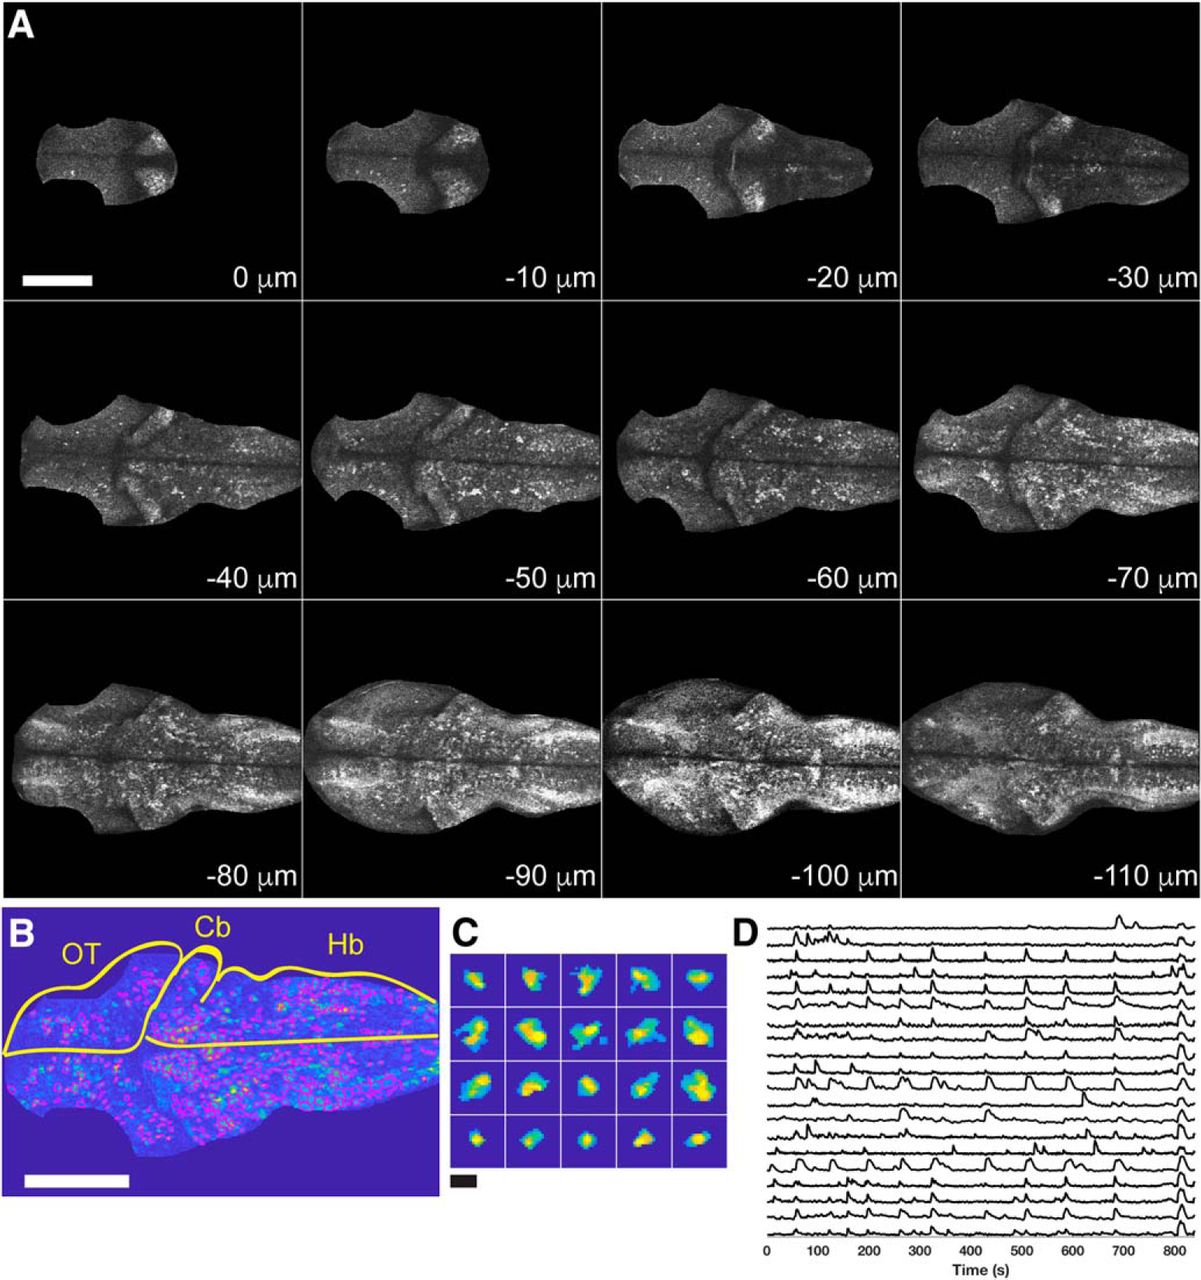 Figure 1. Two-photon imaging of GCaMP6s in zebrafish larvae. A, Each panel shows an optical section from a single time point of a movie collected in a 4 dpf zebrafish larva. Sections are arranged from dorsal (0 μm) to ventral (–110 μm). The brain was cropped to remove skin fluorescence and signal from the synaptic neuropil of the optic tectum. Scale bar = 100 μm. B, Detection of cells identified by constrained non-negative matrix factorization (Pnevmatikakis et al., 2016). ROIs outlined in magenta on top of an average image for a single imaging plane from a 4 dpf larva. Cb, cerebelleum; Hb, hindbrain; OT, optic tectum. Scale bar = 100 μm. C, Selected ROIs. Scale bar = 15 μm. D, Selected ΔF/F traces obtained from the segmented plane in B, C.